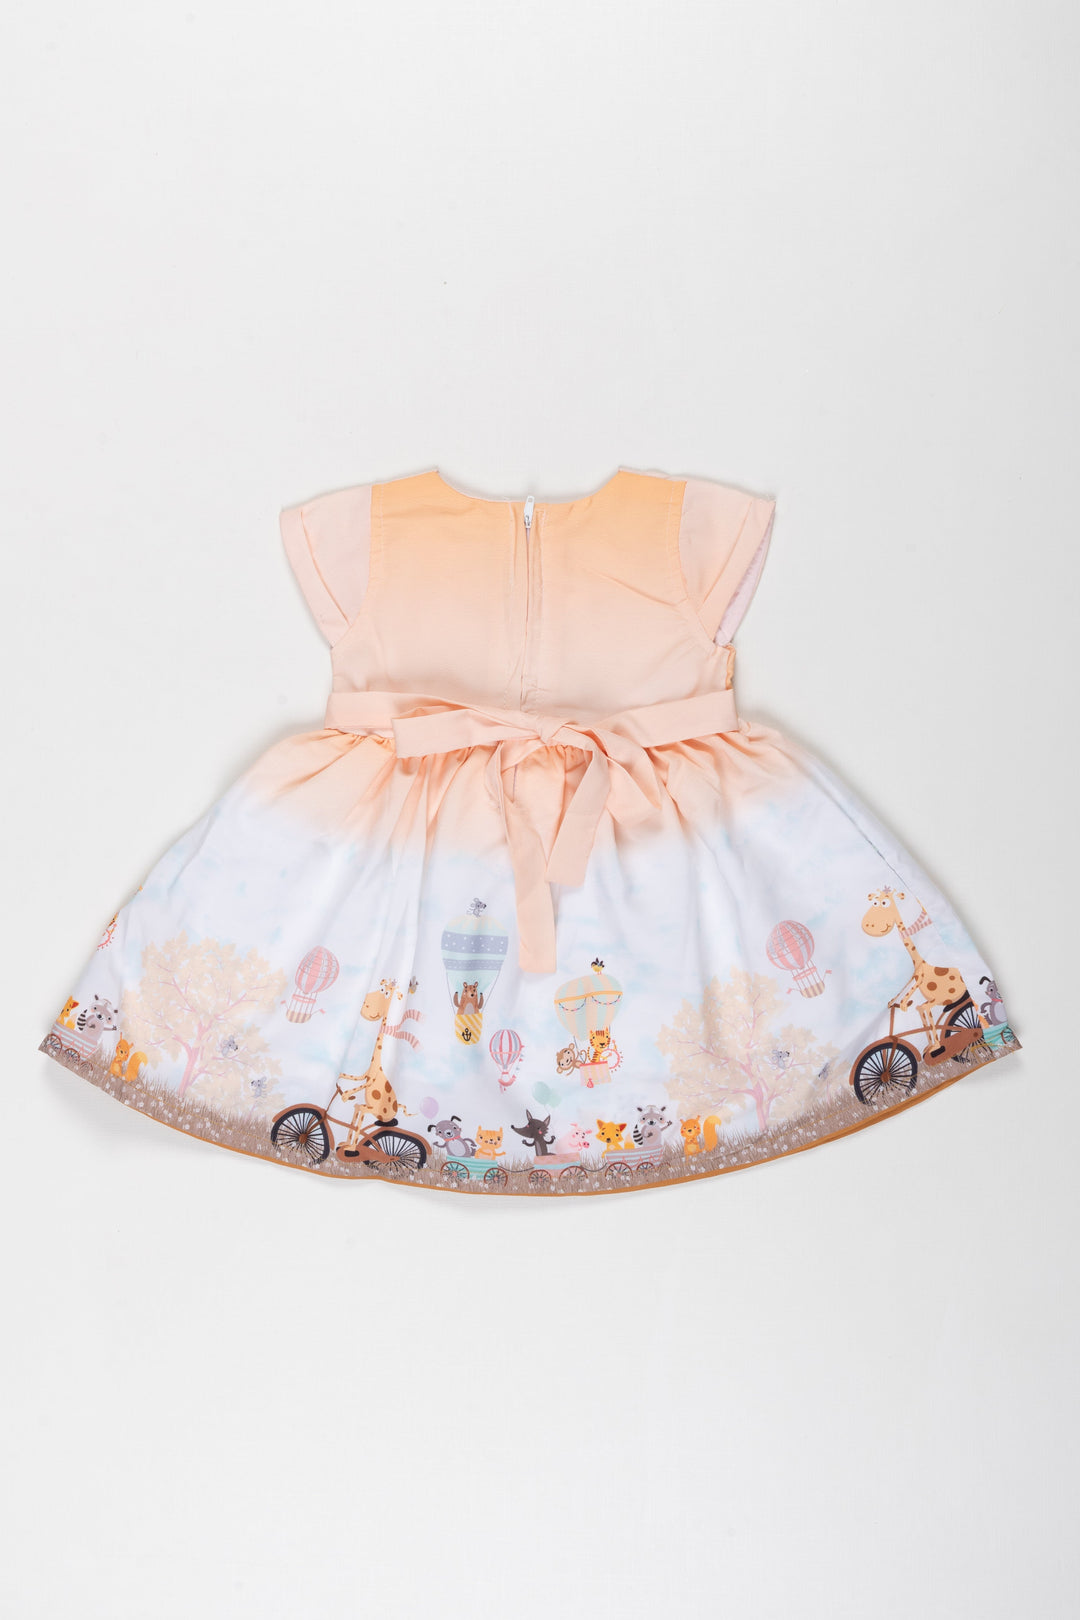 The Nesavu Baby Fancy Frock Sunny Safari Baby Girl Frock - Perfect for Parties and Playtime Nesavu Explore Style Adventures with Our Safari Inspired Baby Girl Frock | The Nesavu